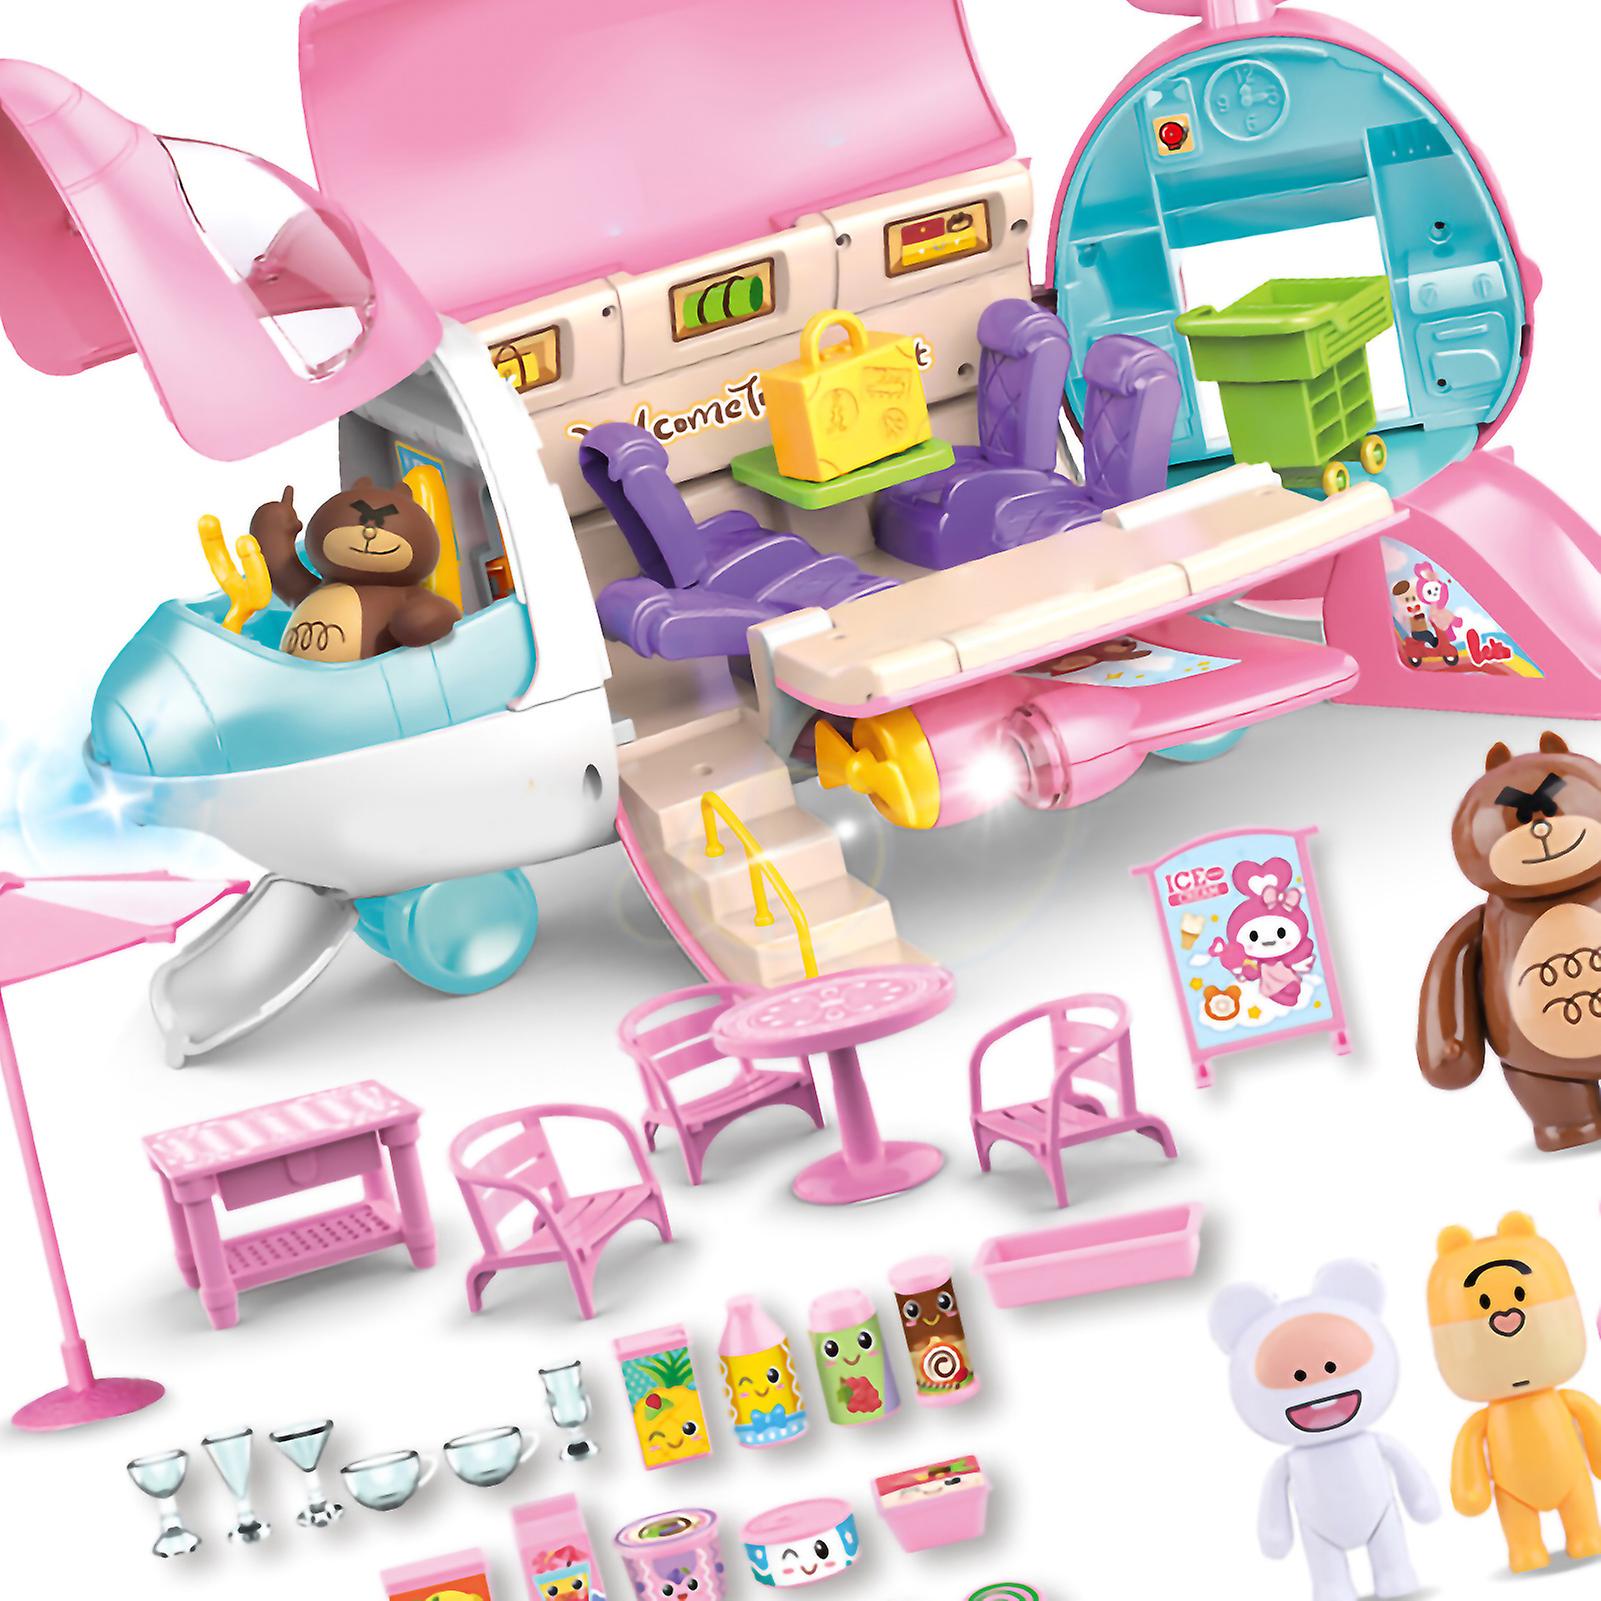 Mini Airliner Model Kitchen Toy Set Cartoon Cute Kitchen Accessories Toy Set for Girls Toddlers Kids Pink Box Package